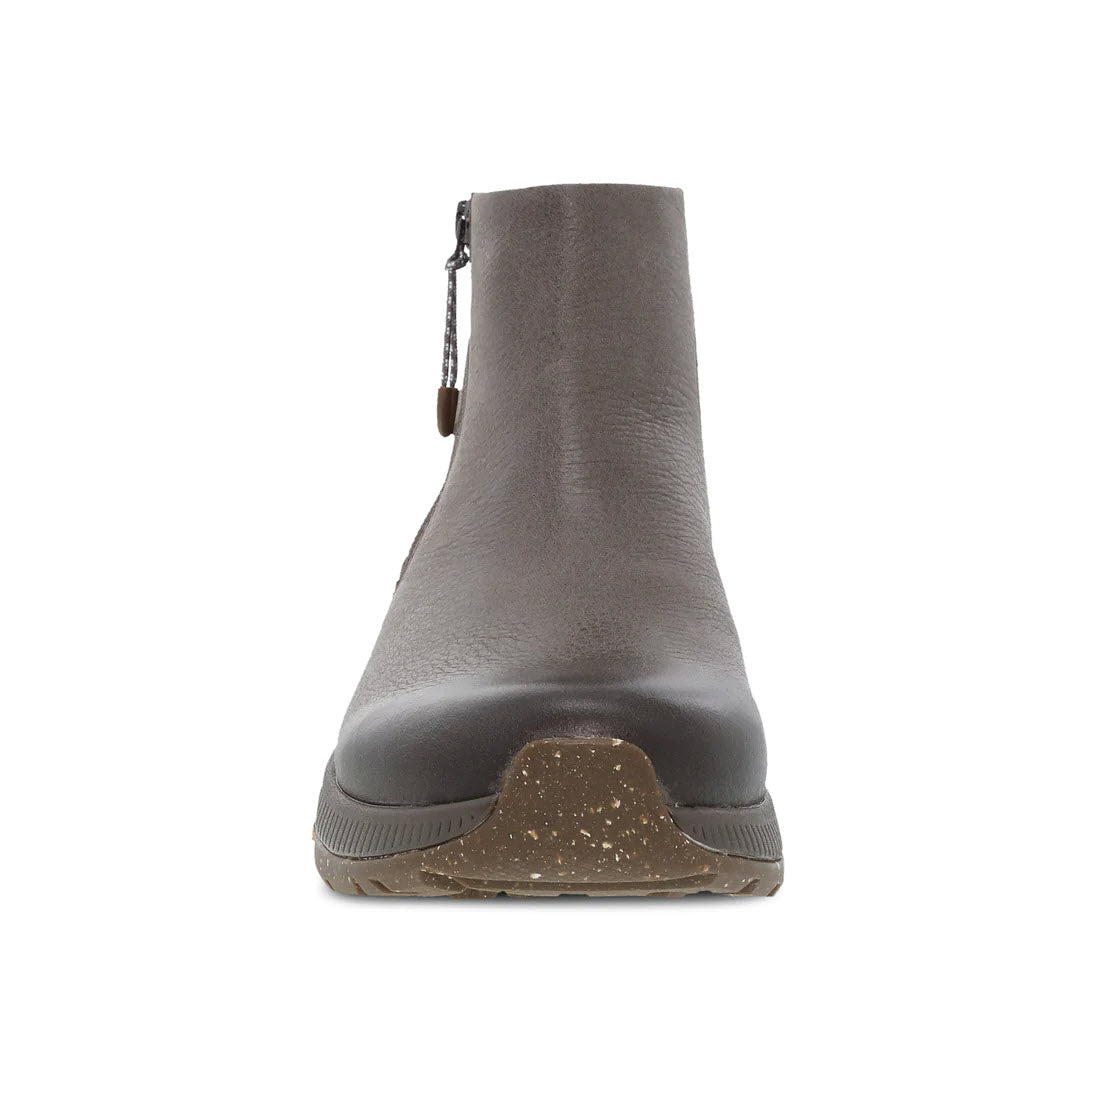 A gray waterproof leather ankle boot with an outdoor-inspired zipper, viewed from the front, featuring a black rubber sole with a speckled pattern - Dansko Margo Morel Burnished Women&#39;s.